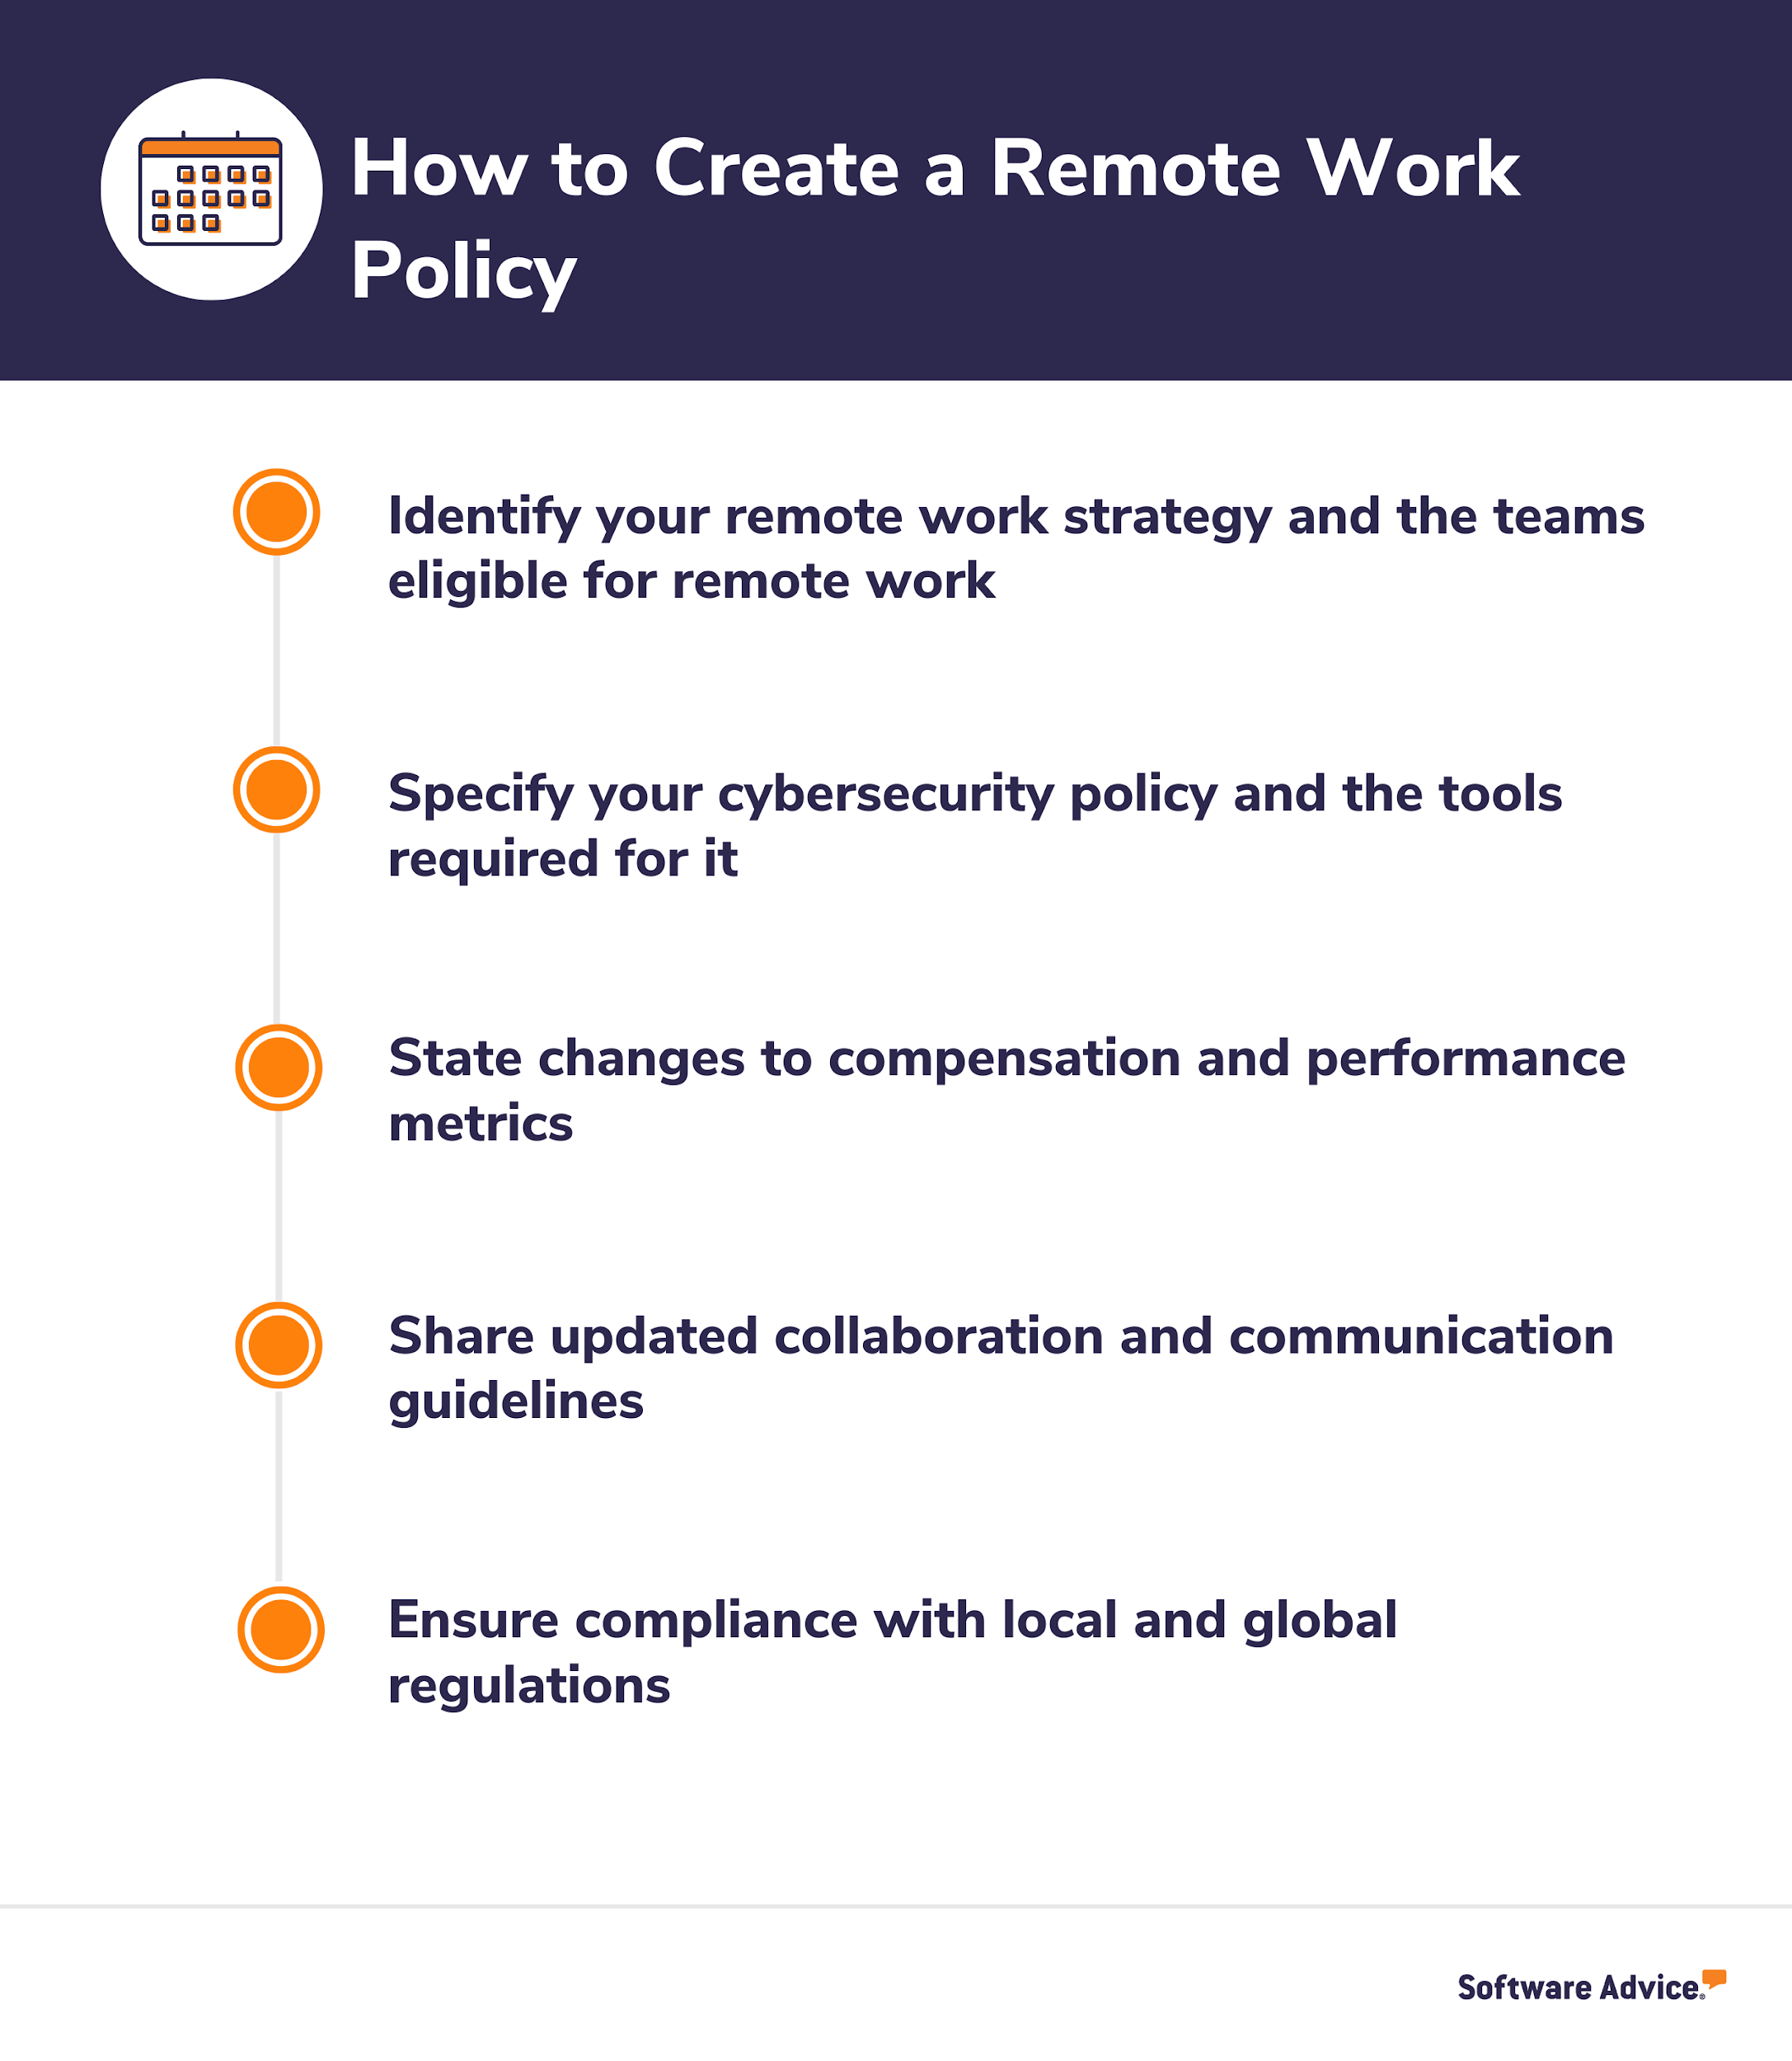 How-to-create-a-remote-work-policy